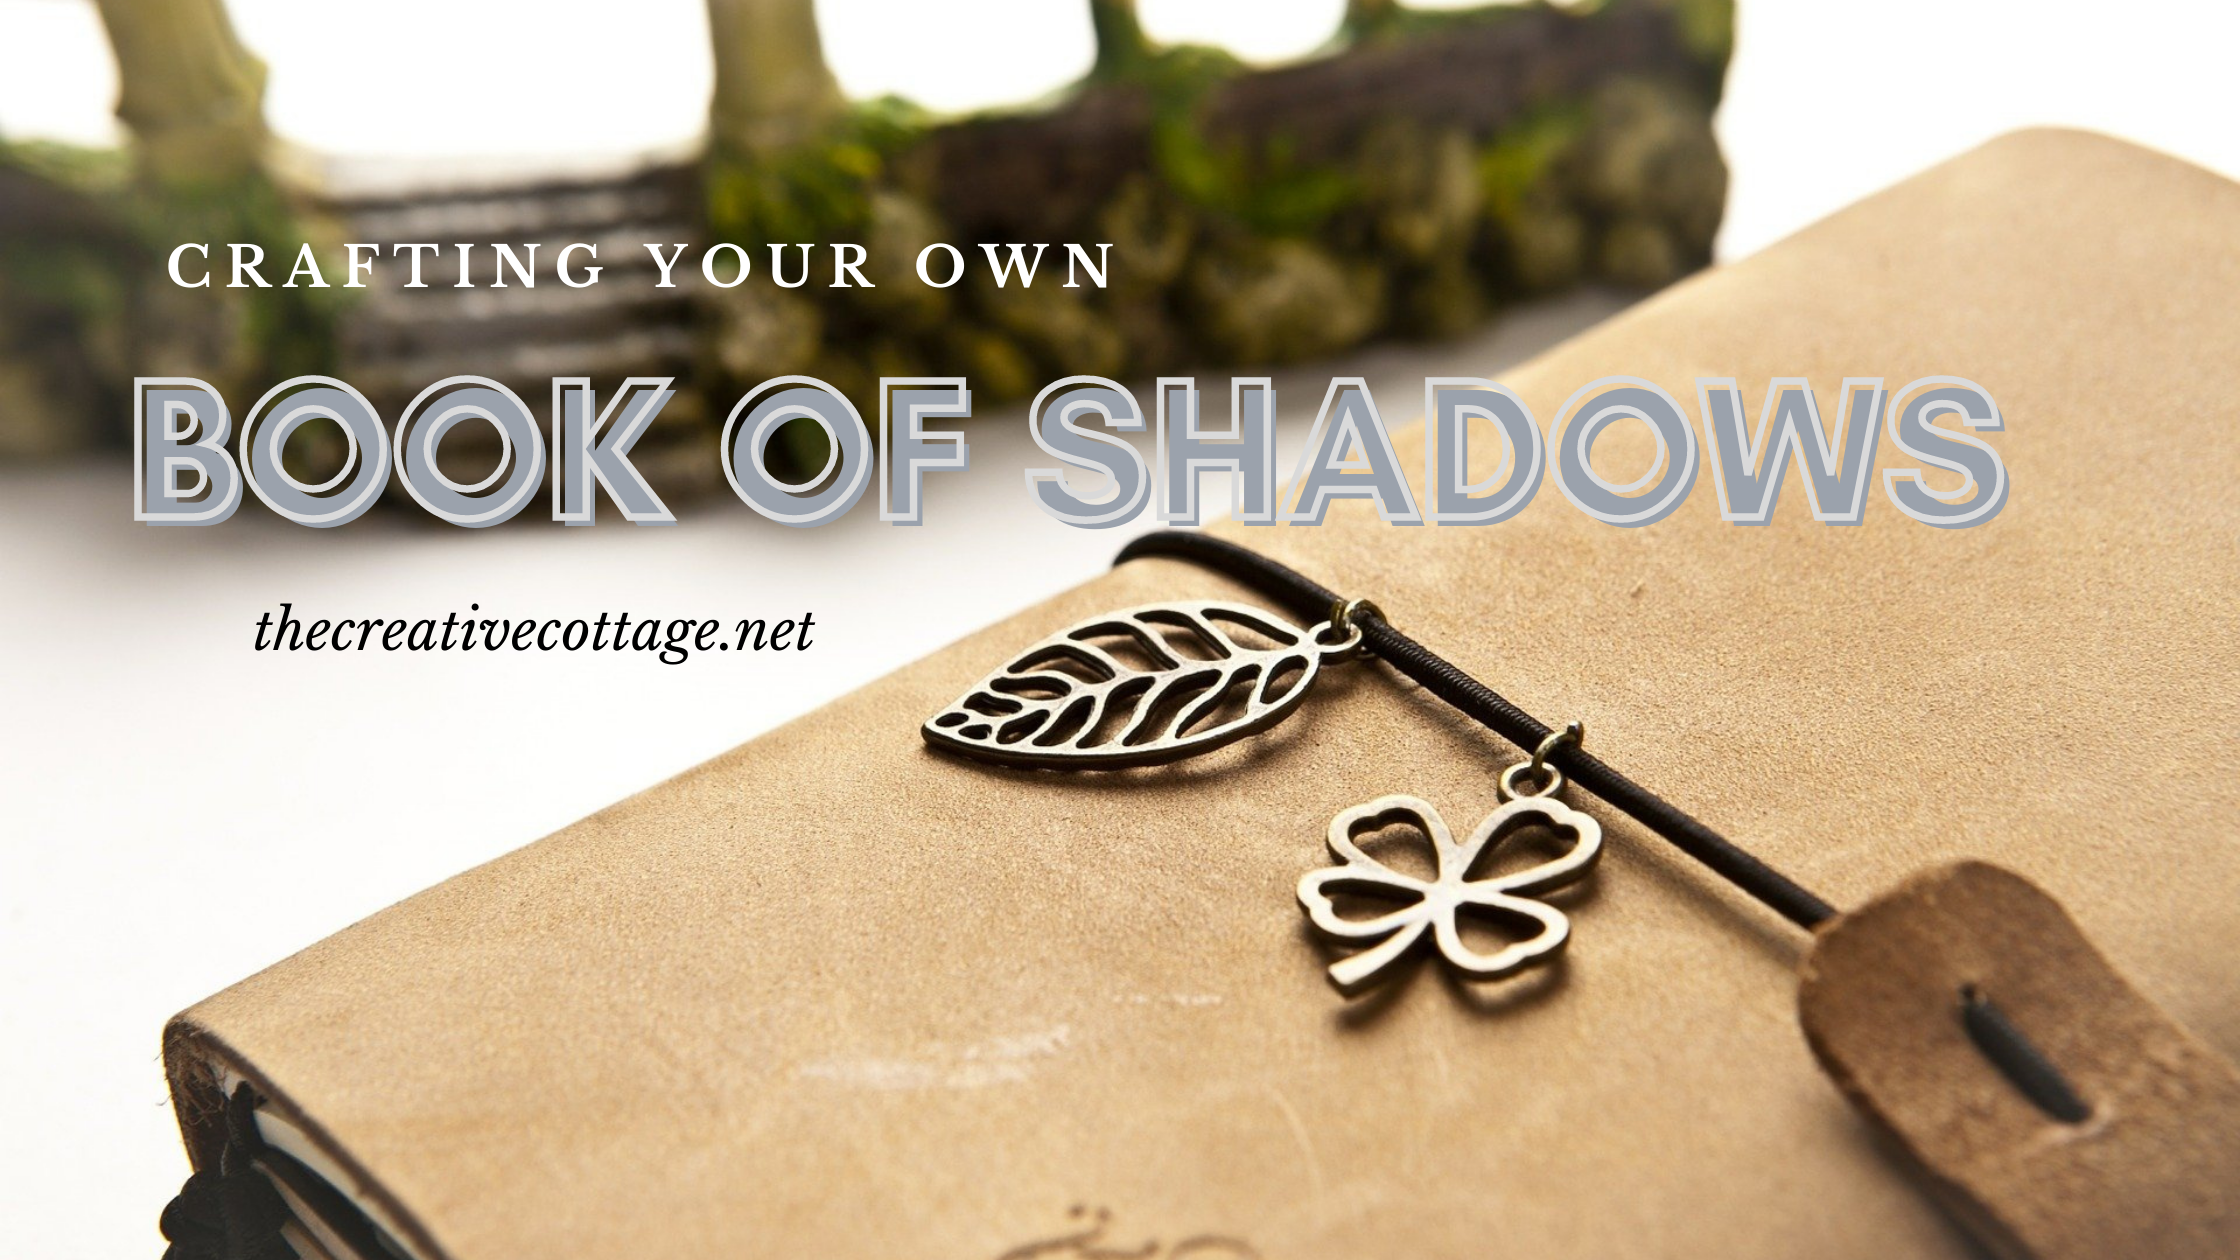 Coloring Book of Shadows: Planner for a Magical 2023 